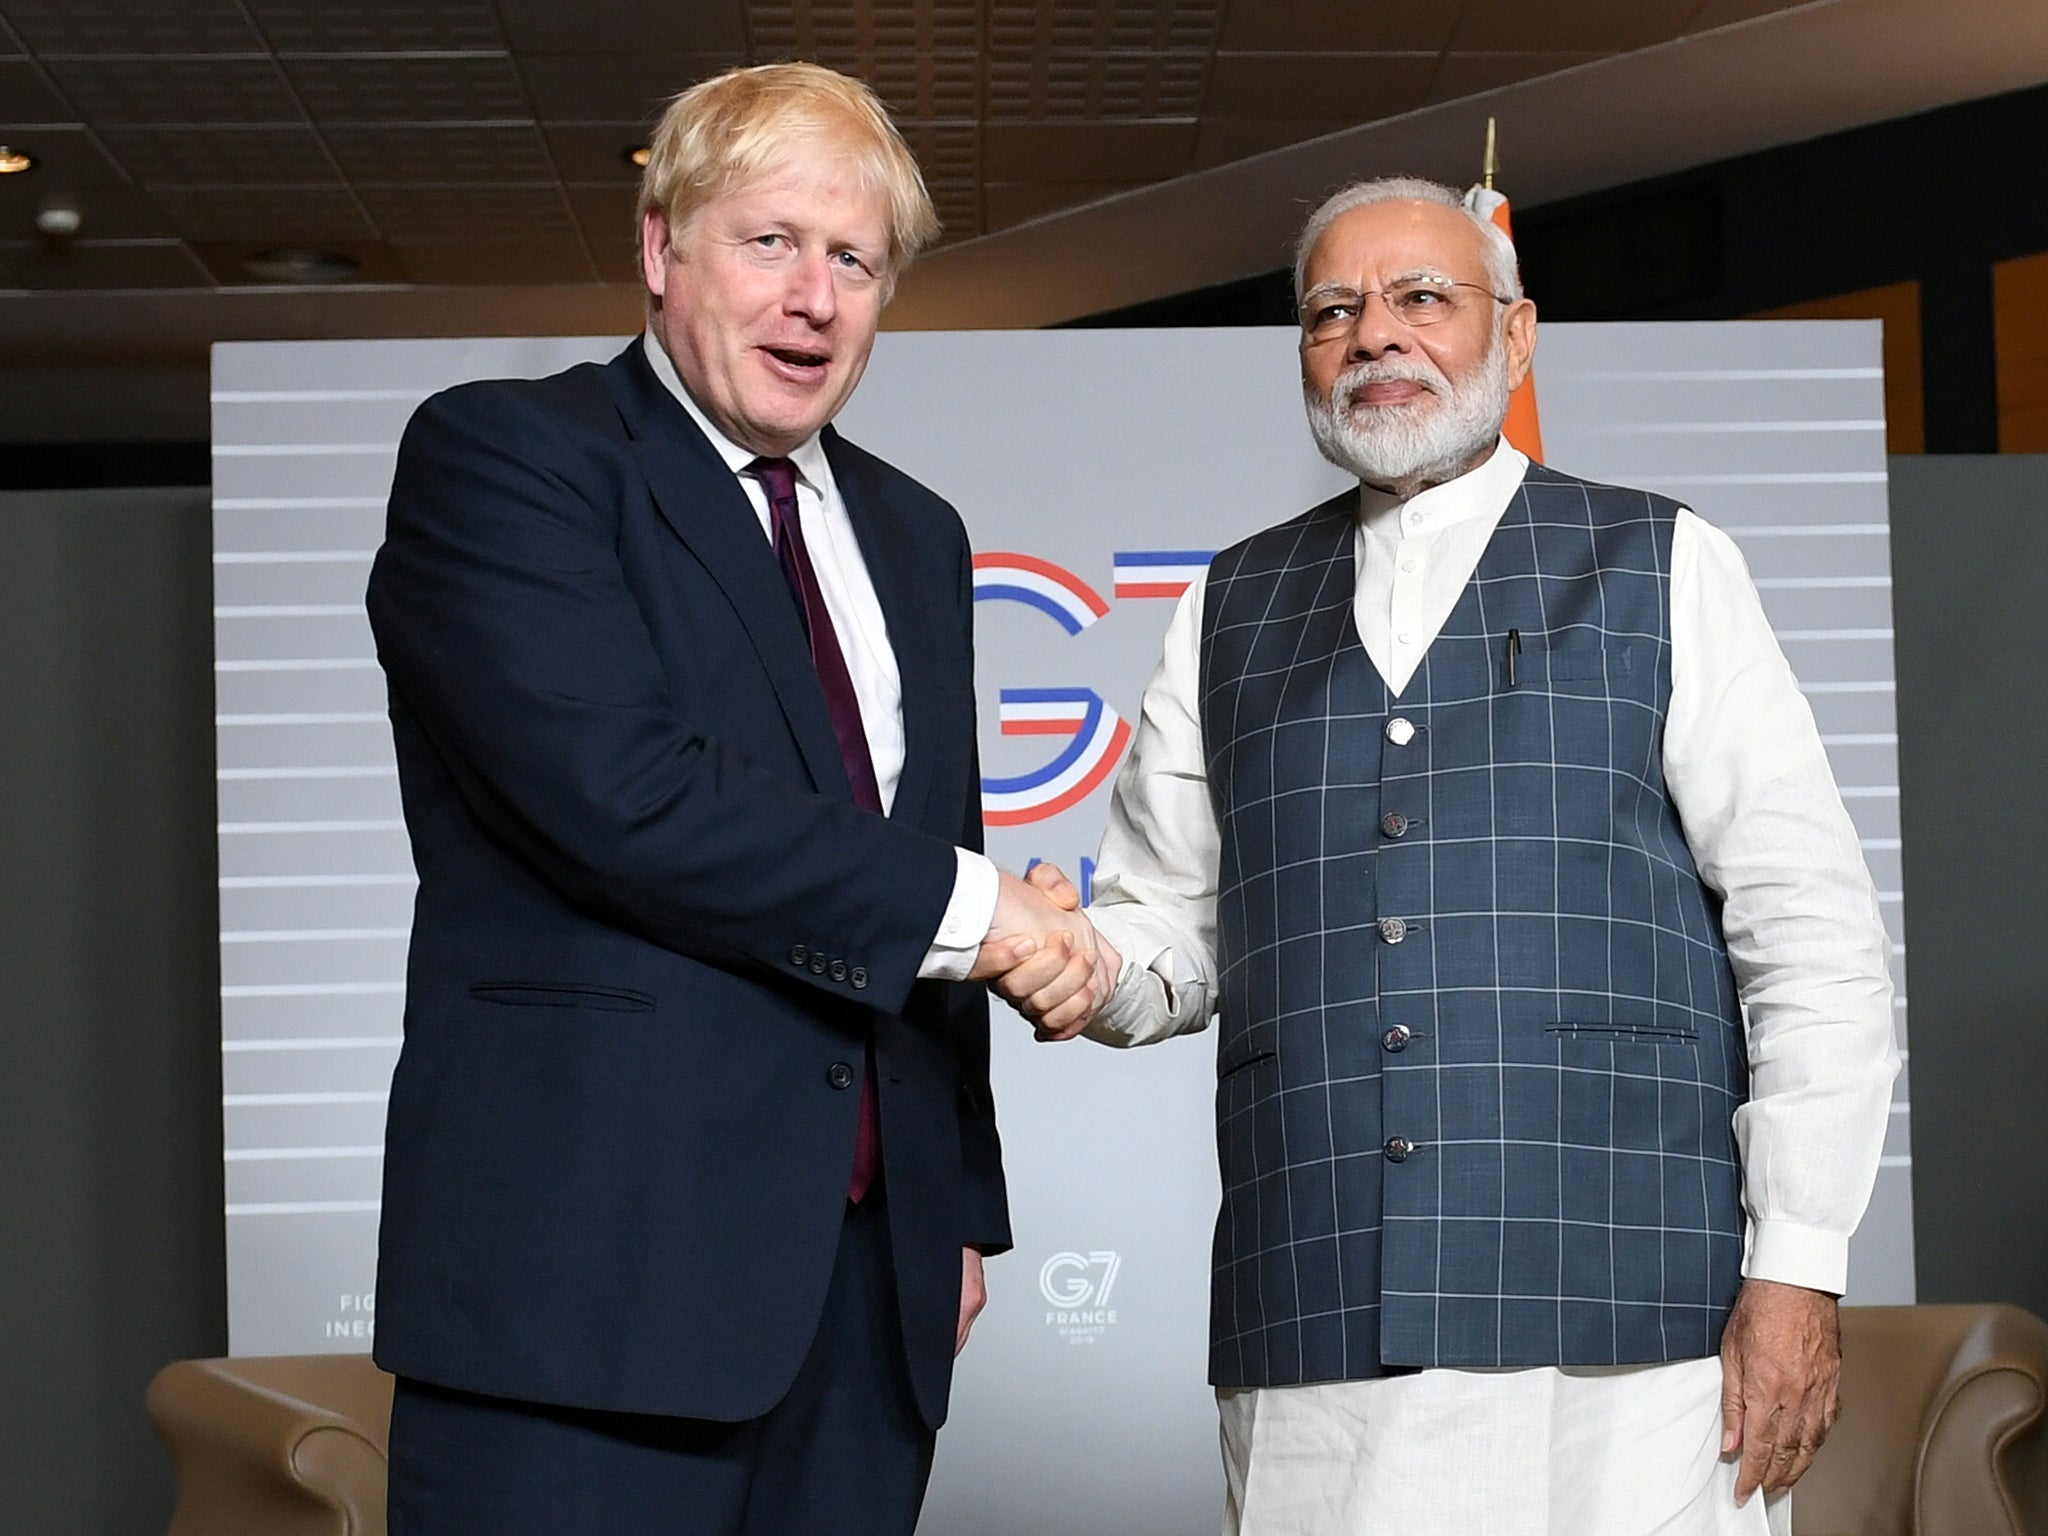 Boris Johnson will be meeting his Indian counterpart PM Modi on the sidelines of the Cop26 summit